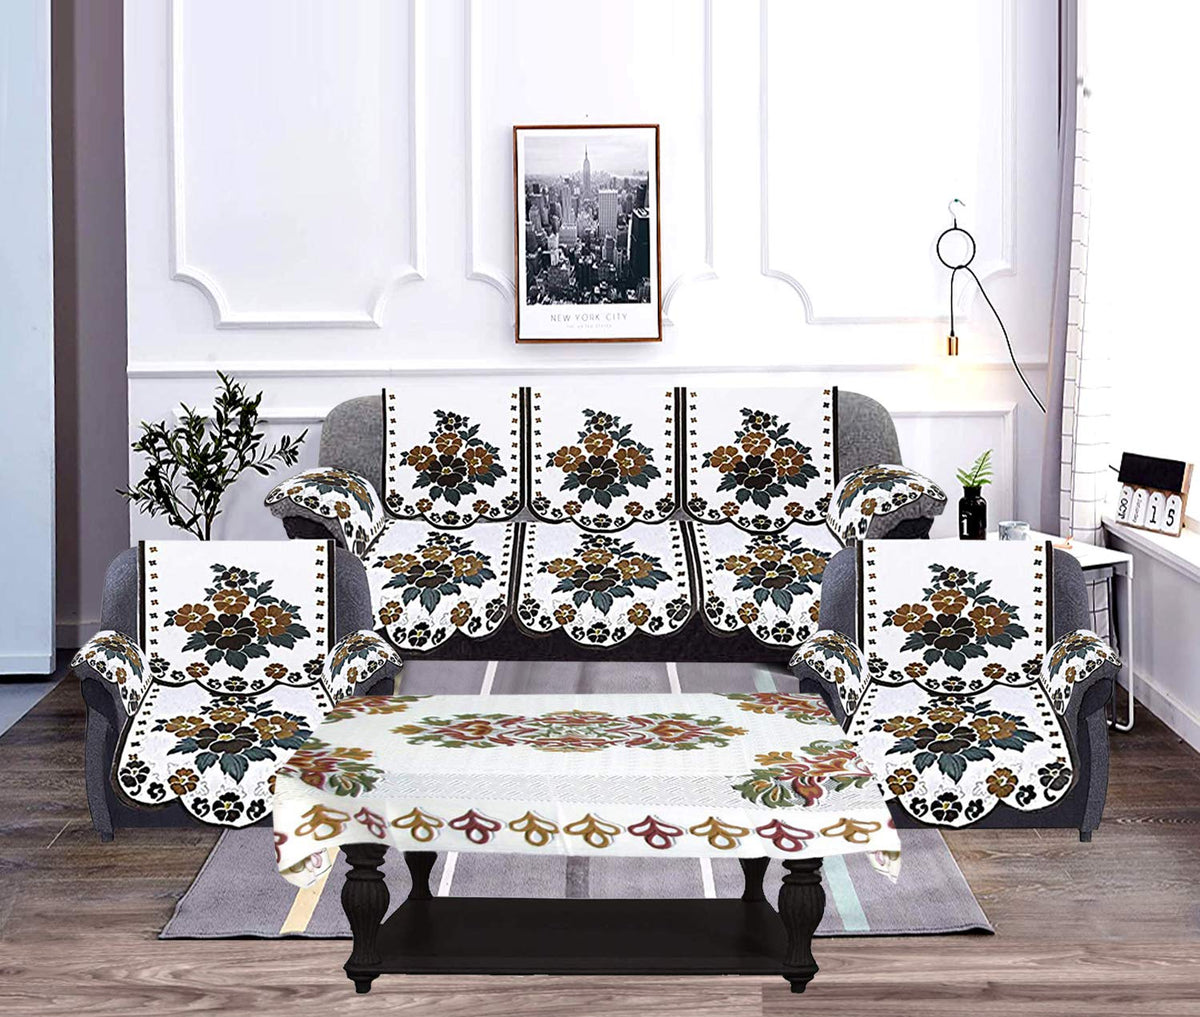 Kuber Industries Flower Design Cotton 5 Seater Sofa Cover with 6 Pieces Arms Cover and 1 Center Table Cover Use Both Side (Set of 17, White & Brown)-KUBMART12029, Standard